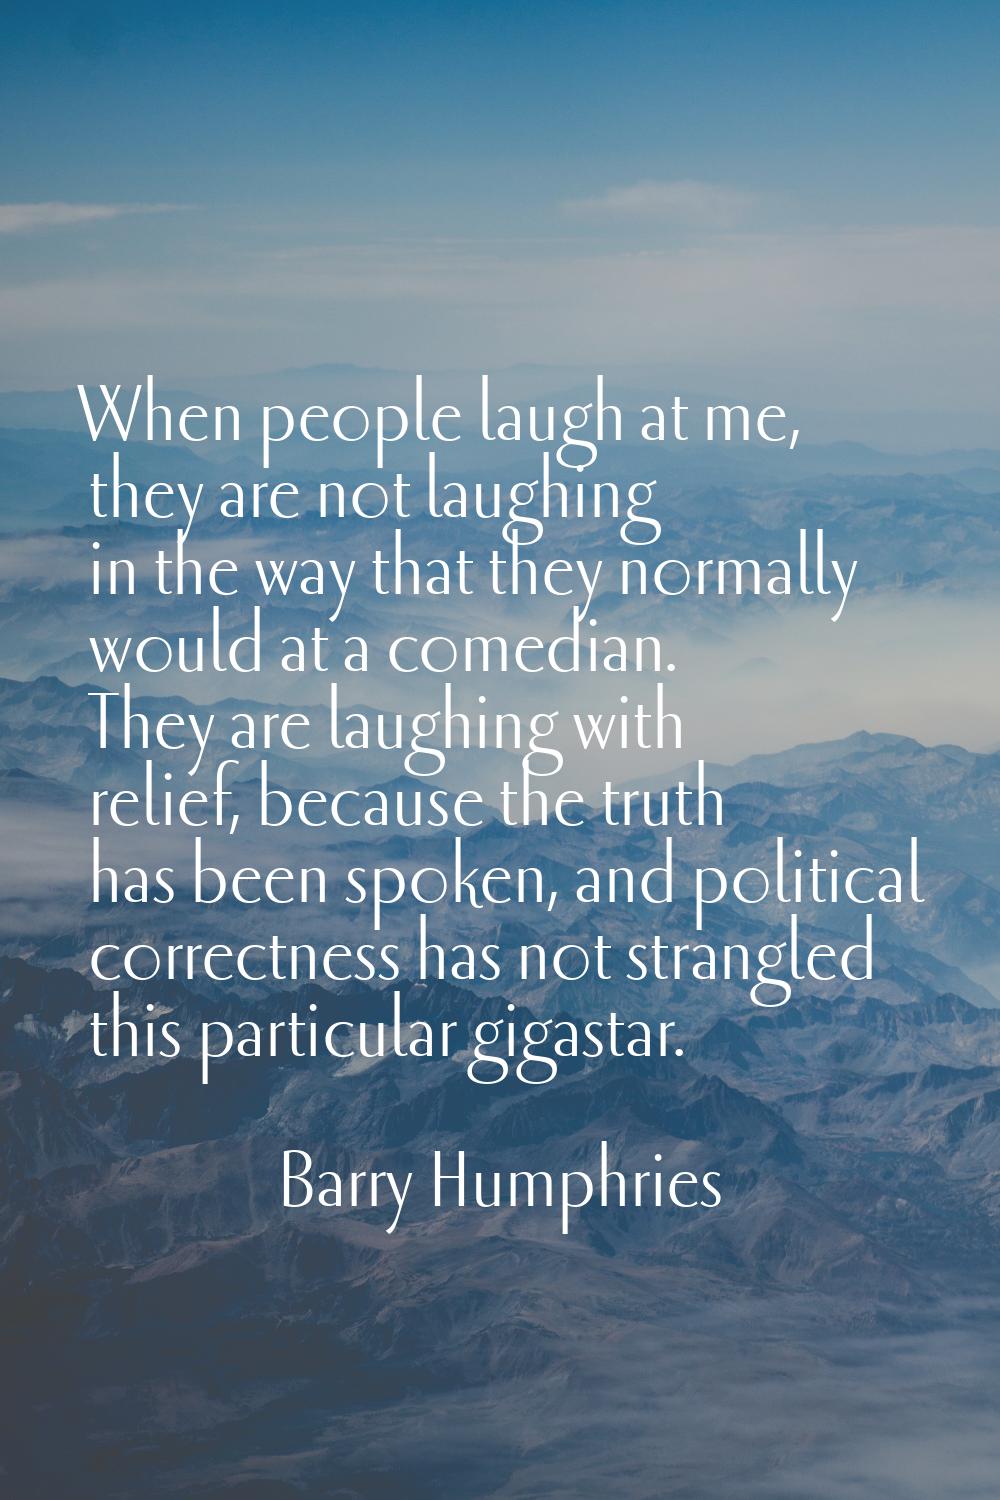 When people laugh at me, they are not laughing in the way that they normally would at a comedian. T